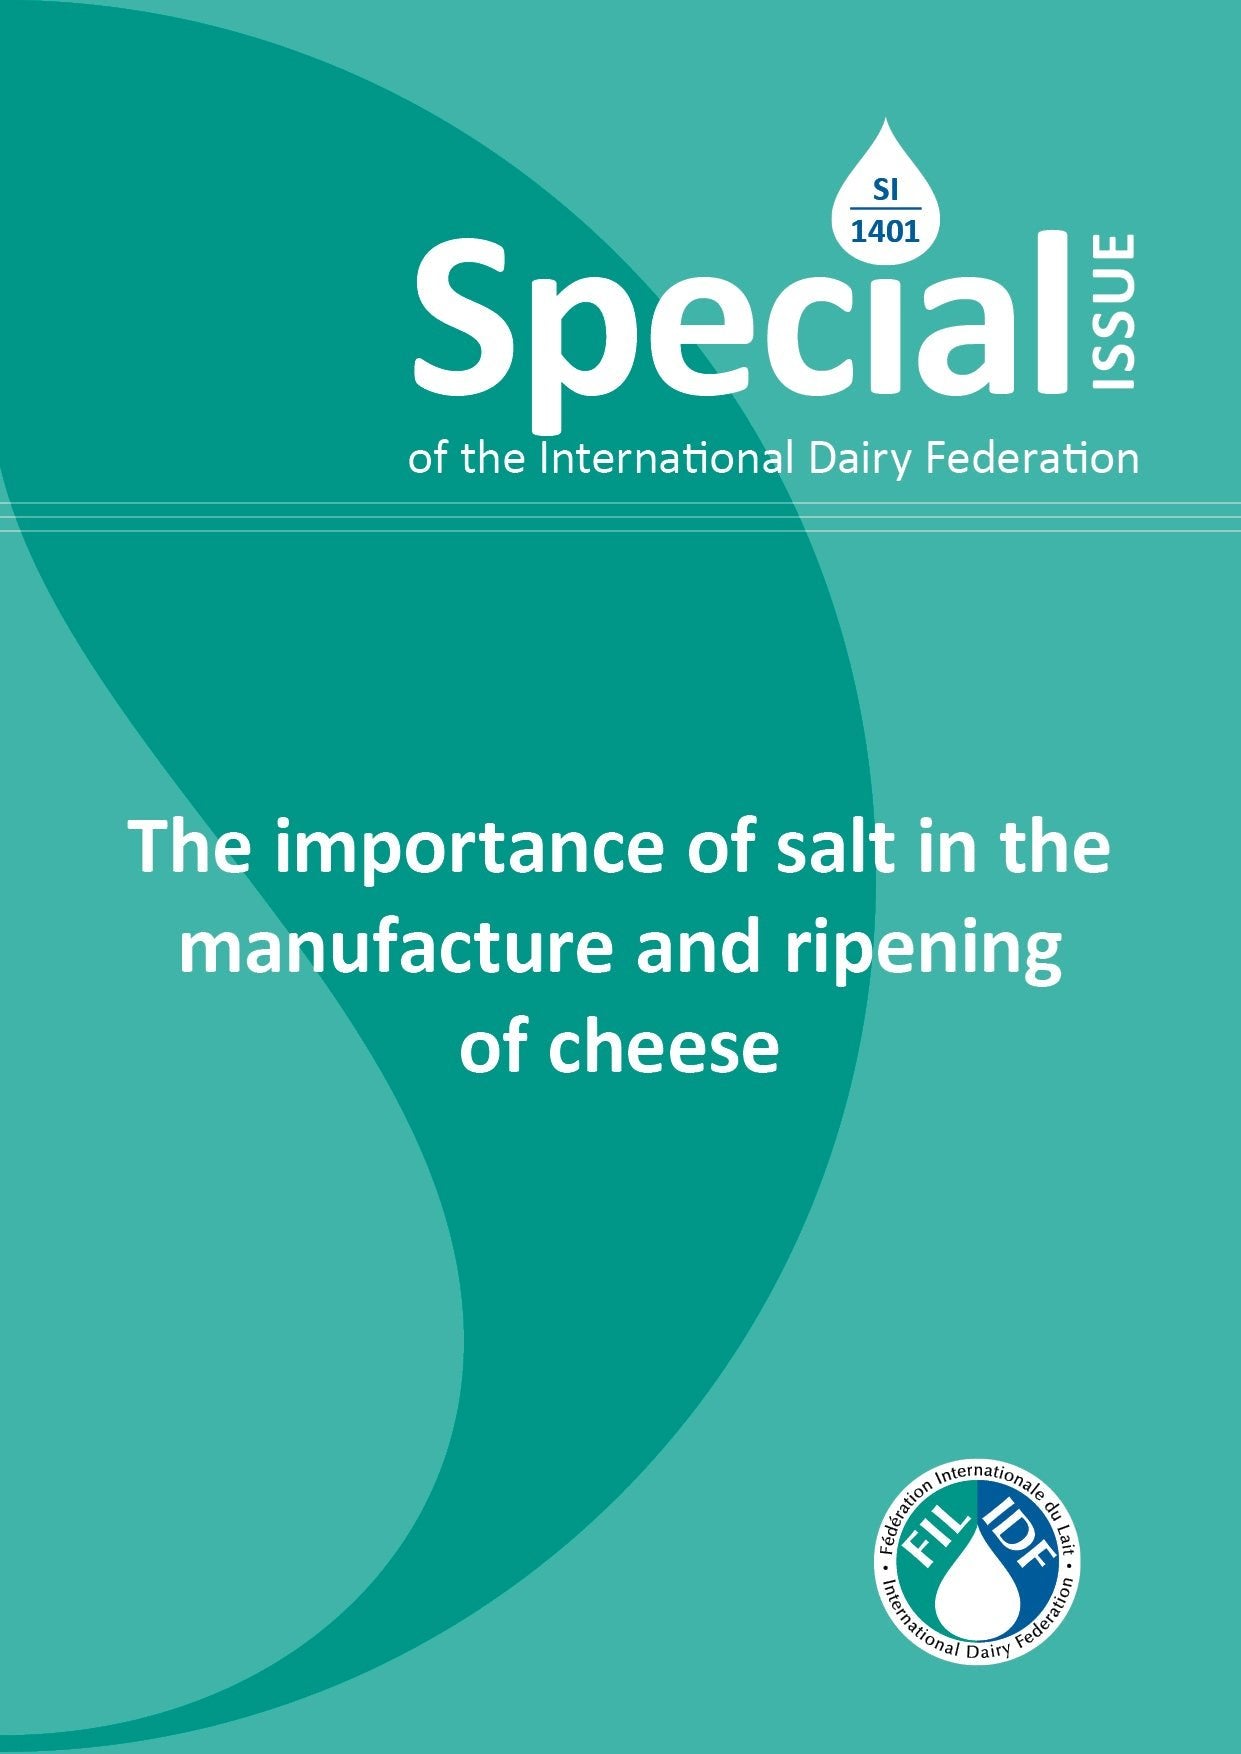 Special Issue 1401 - The importance of salt in the manufacture & ripening of cheese - FIL-IDF